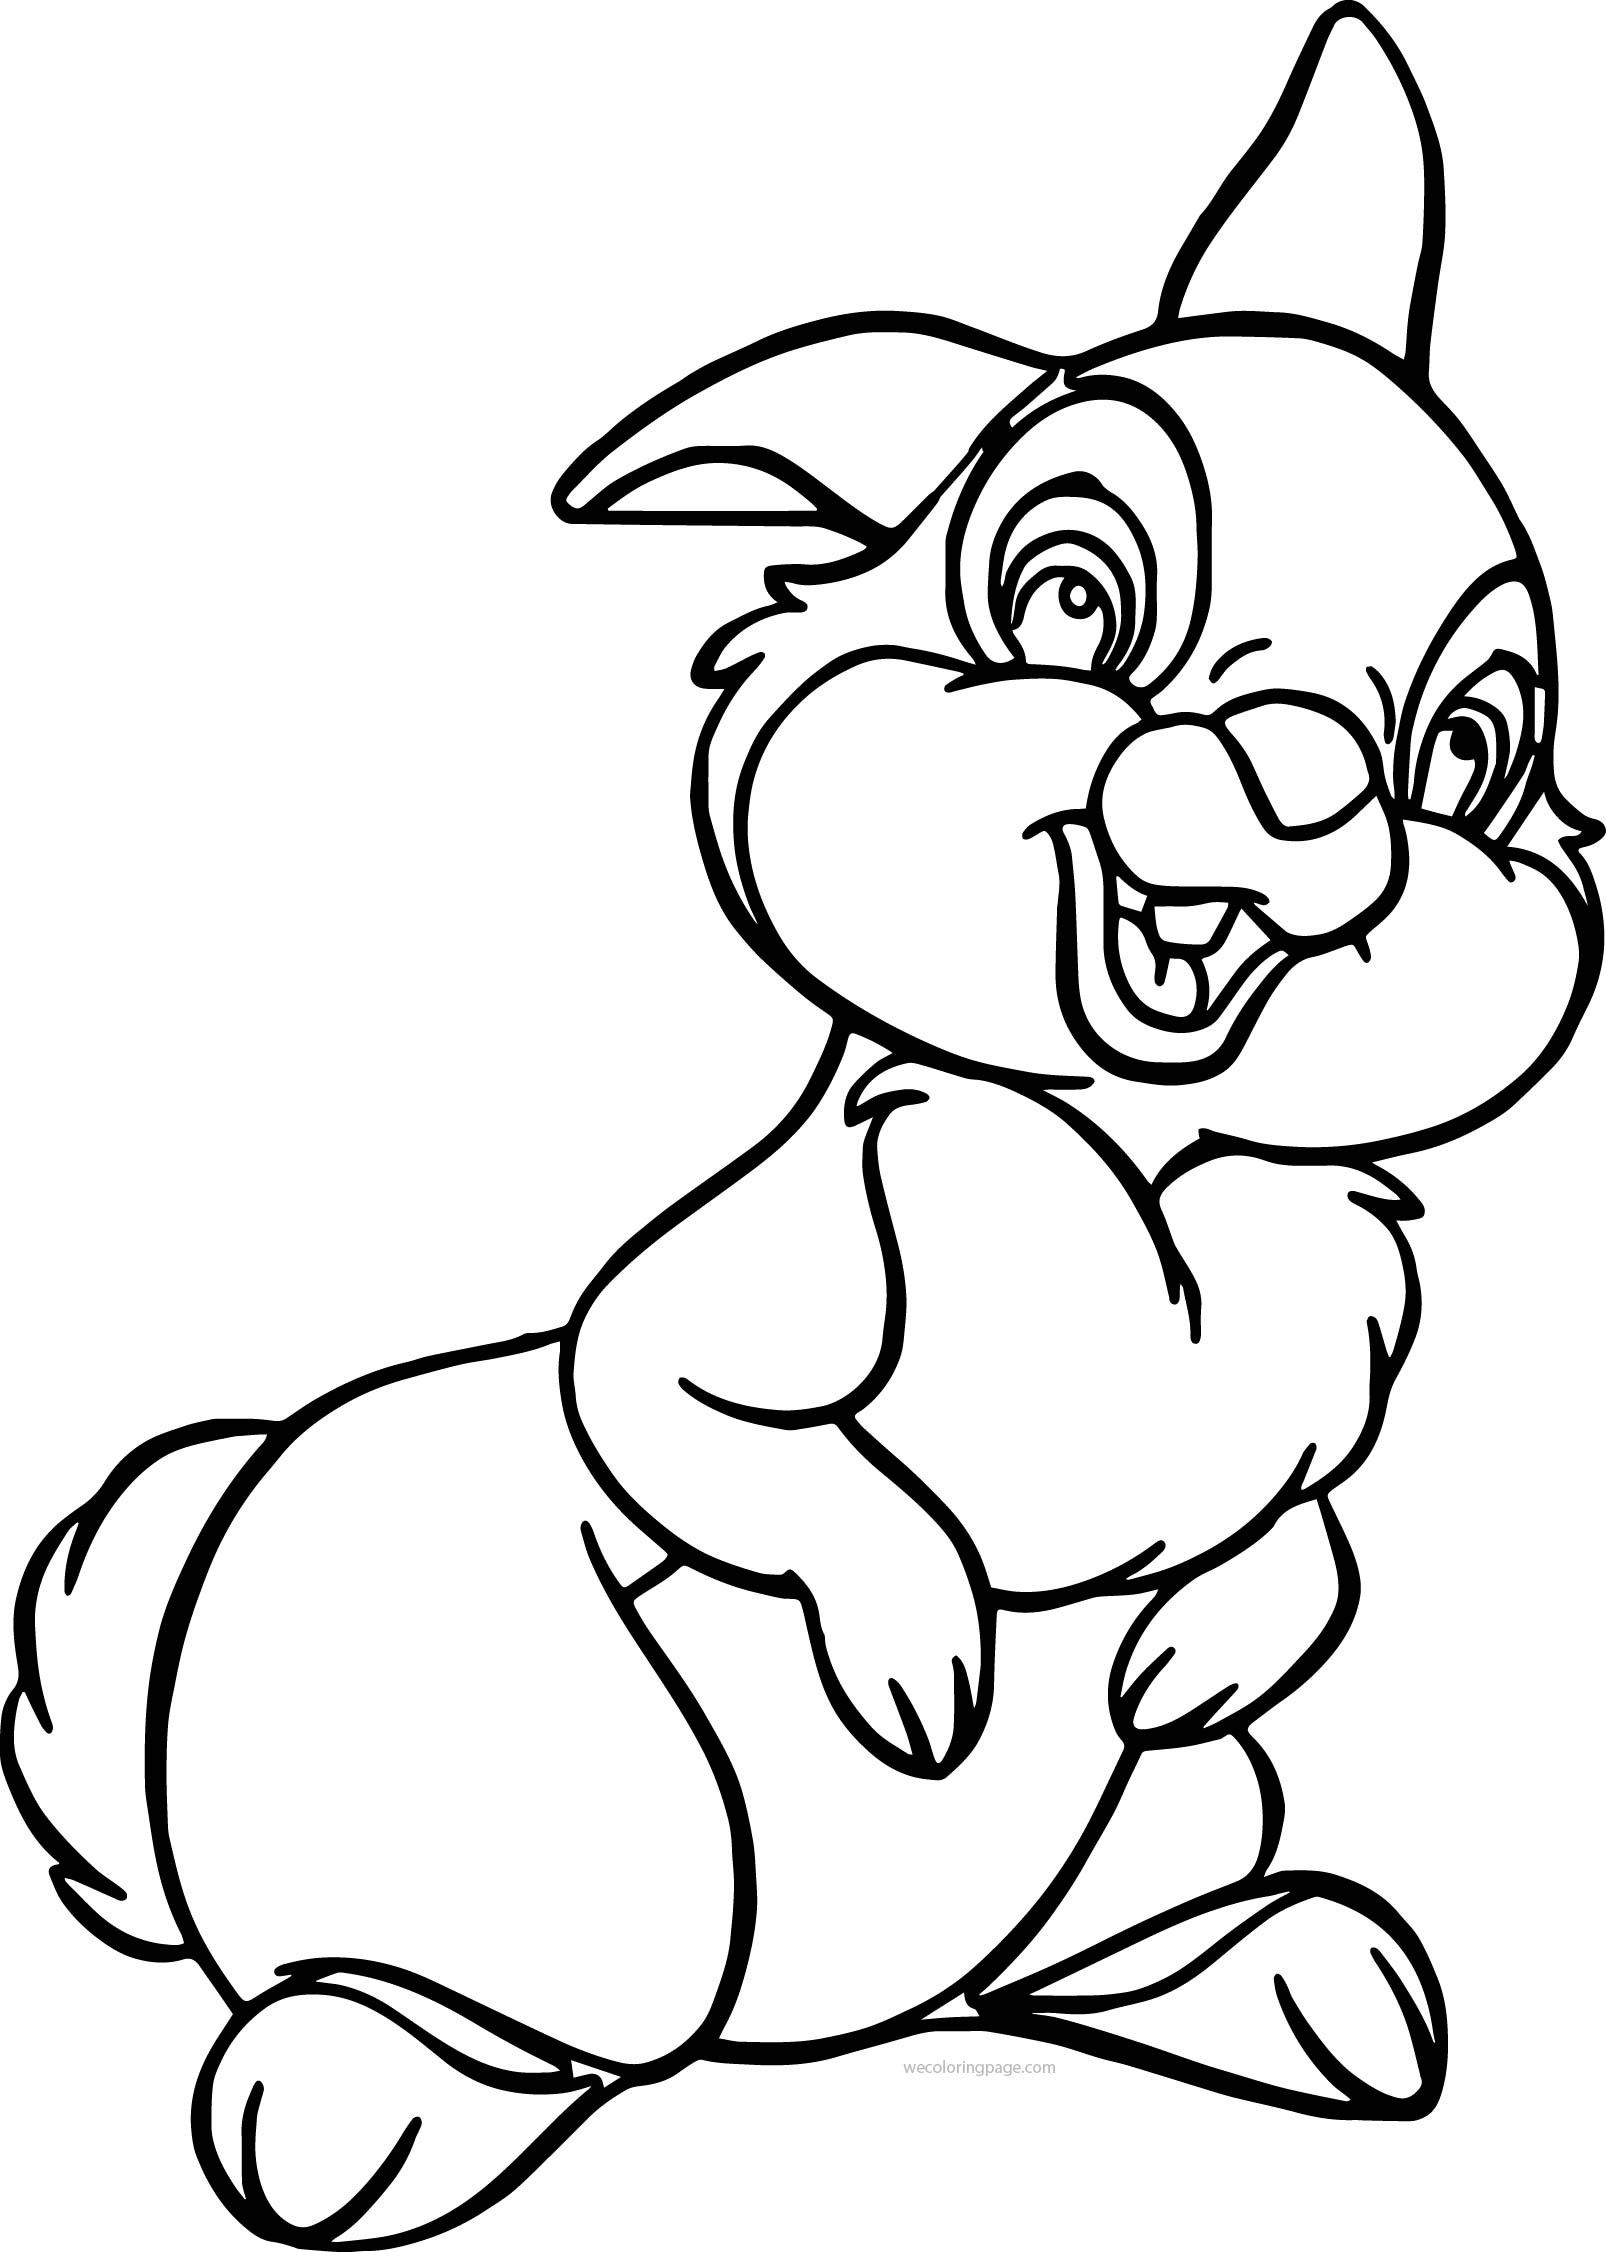 Cartoon Rabbit Coloring Pages at GetDrawings | Free download